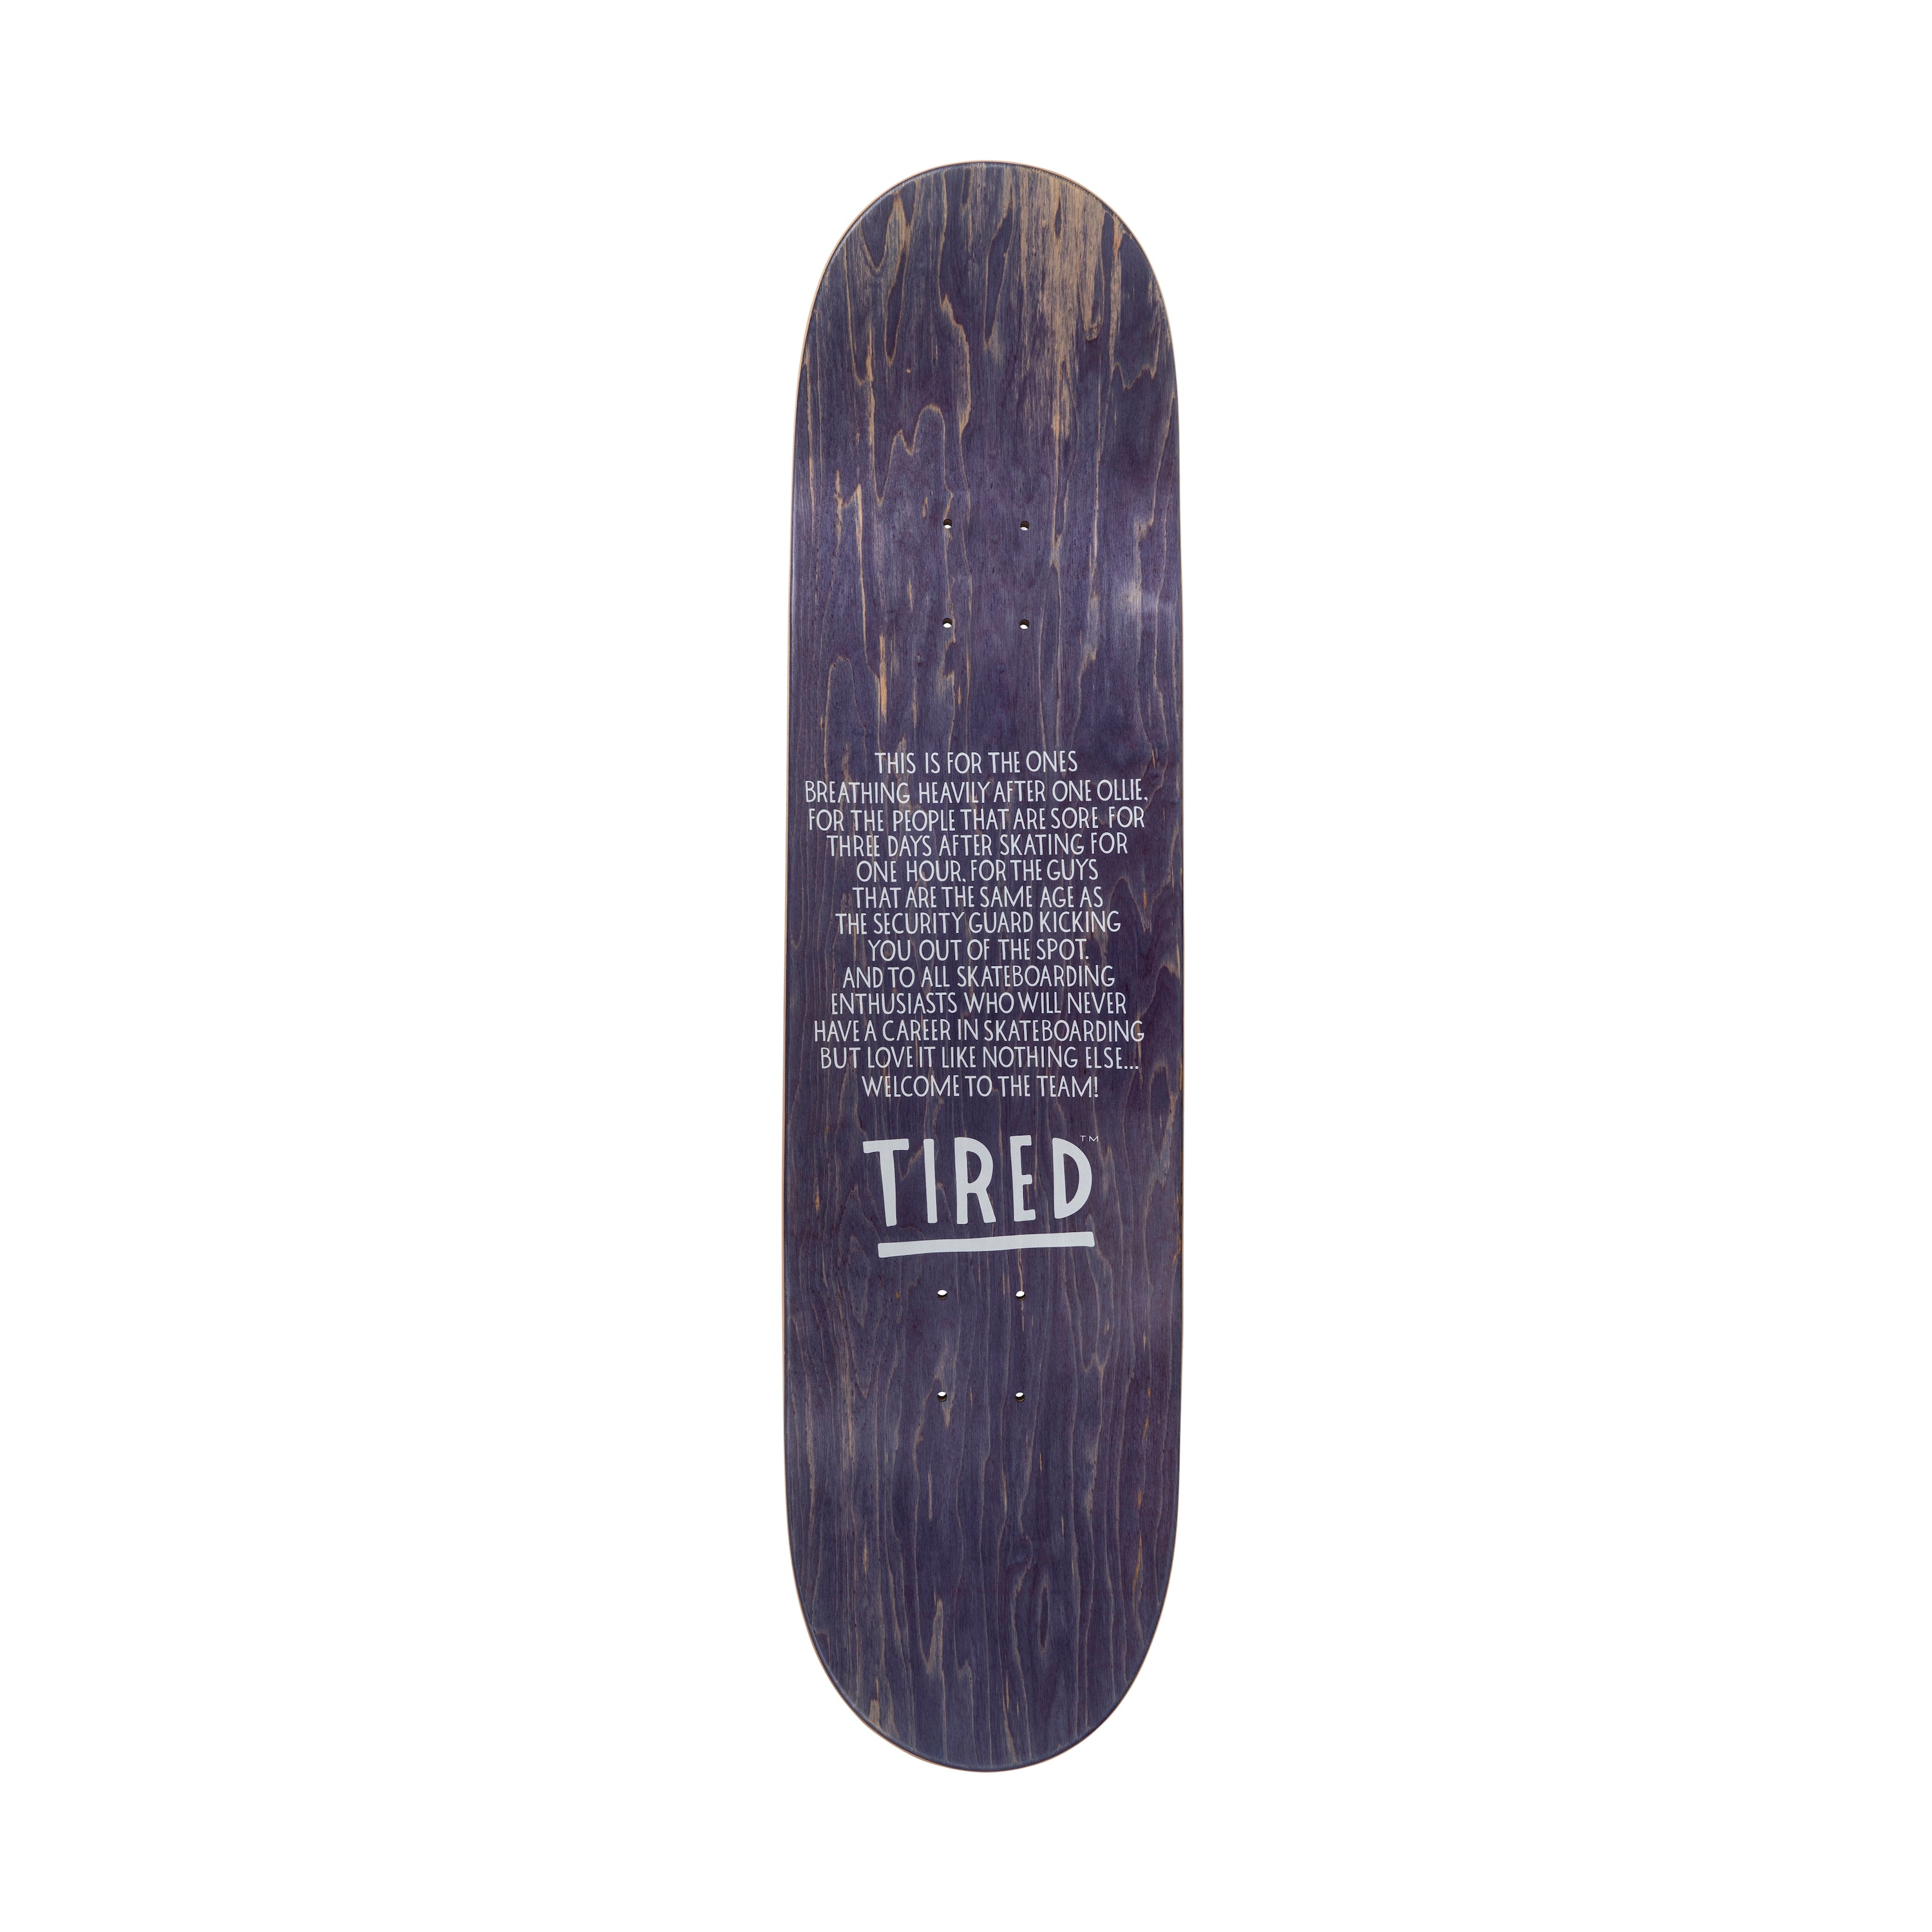 Tired Skateboards Double Vision Deck - 8.25"